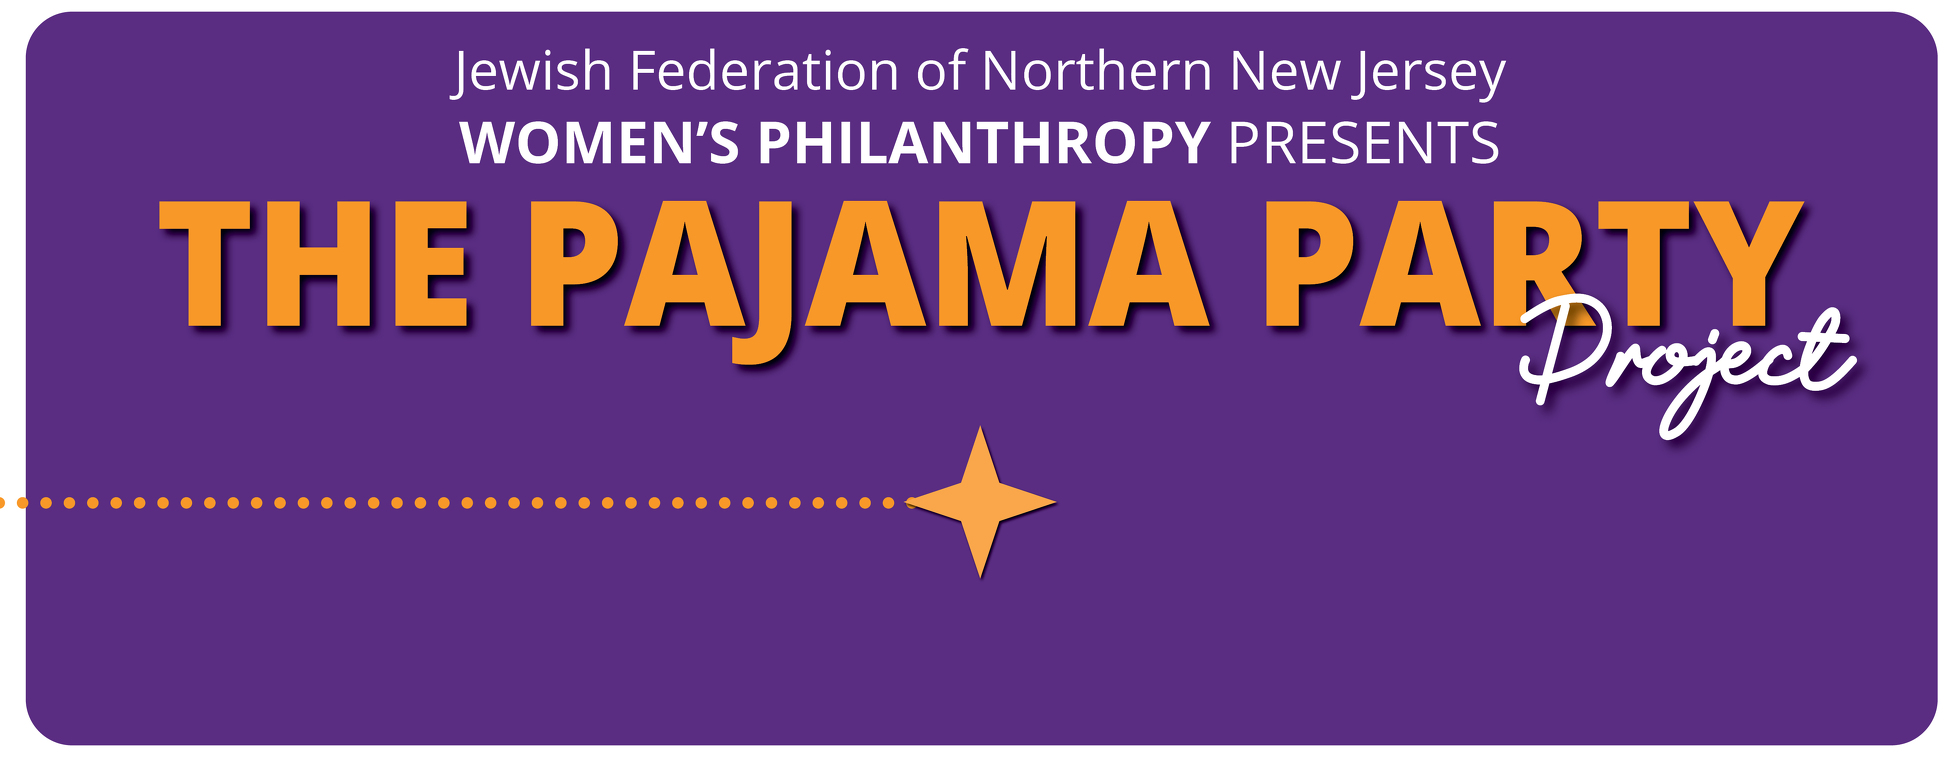 Women's Philanthropy - The Pajama Party Project